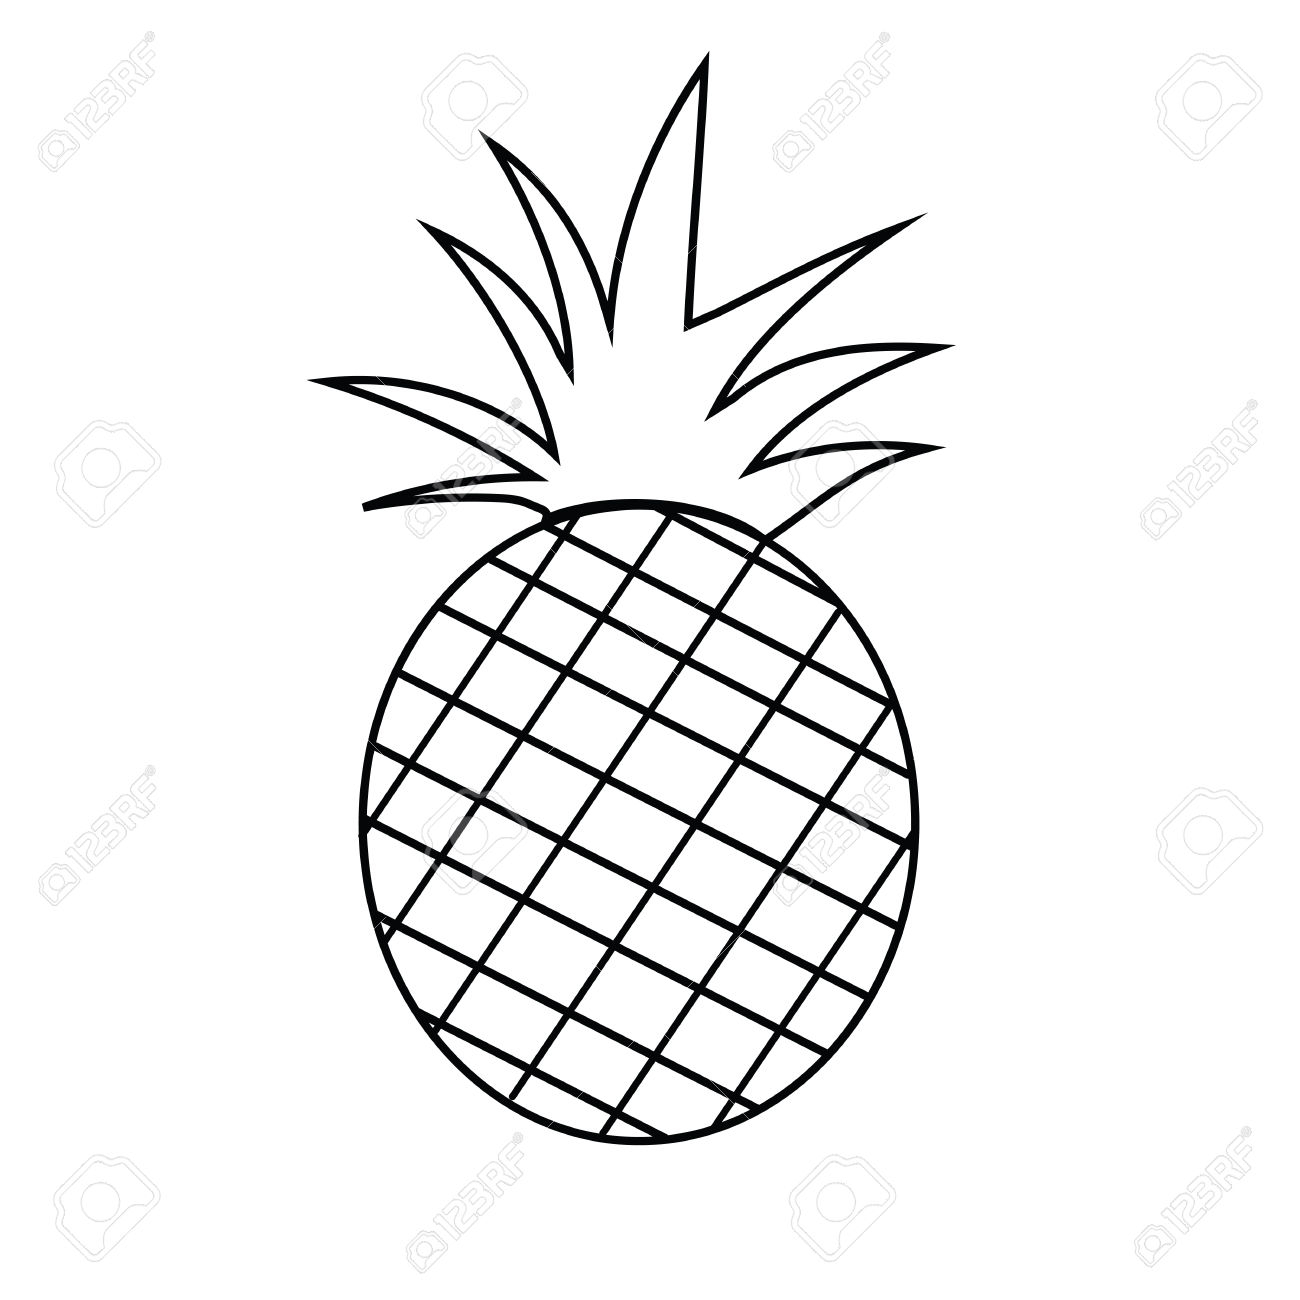 pineapple clipart drawn